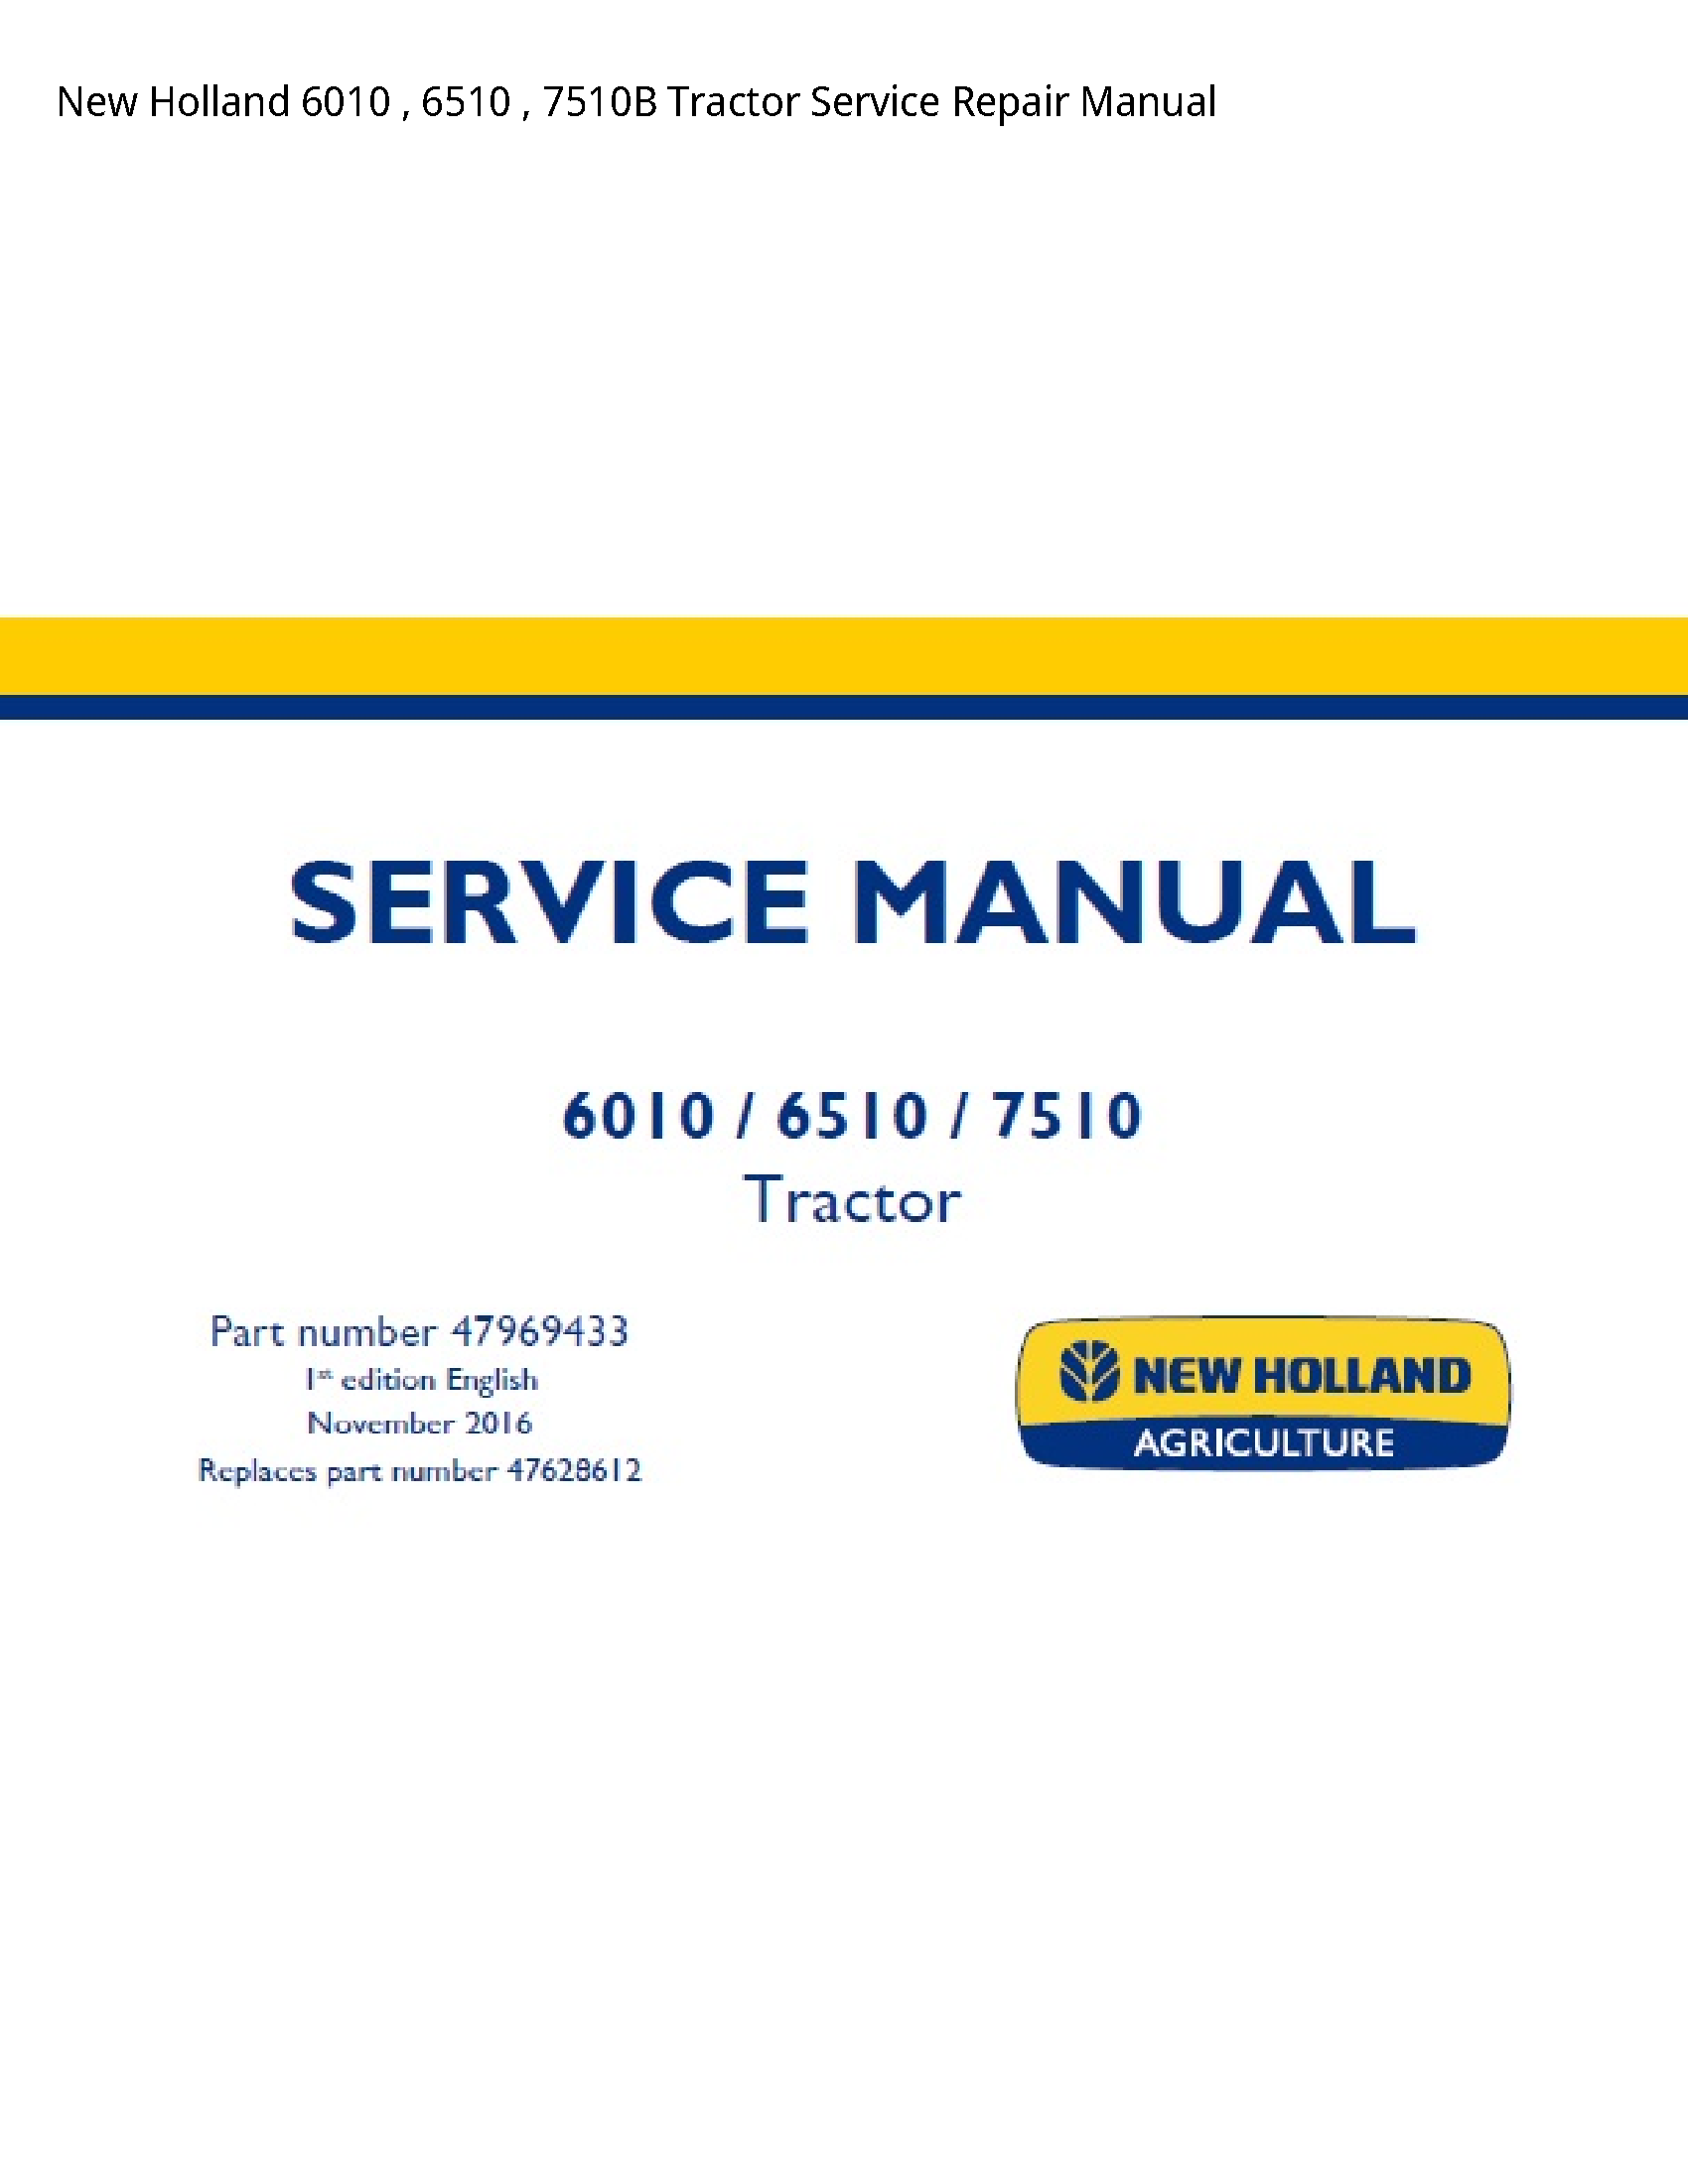 New Holland 6010 Tractor manual